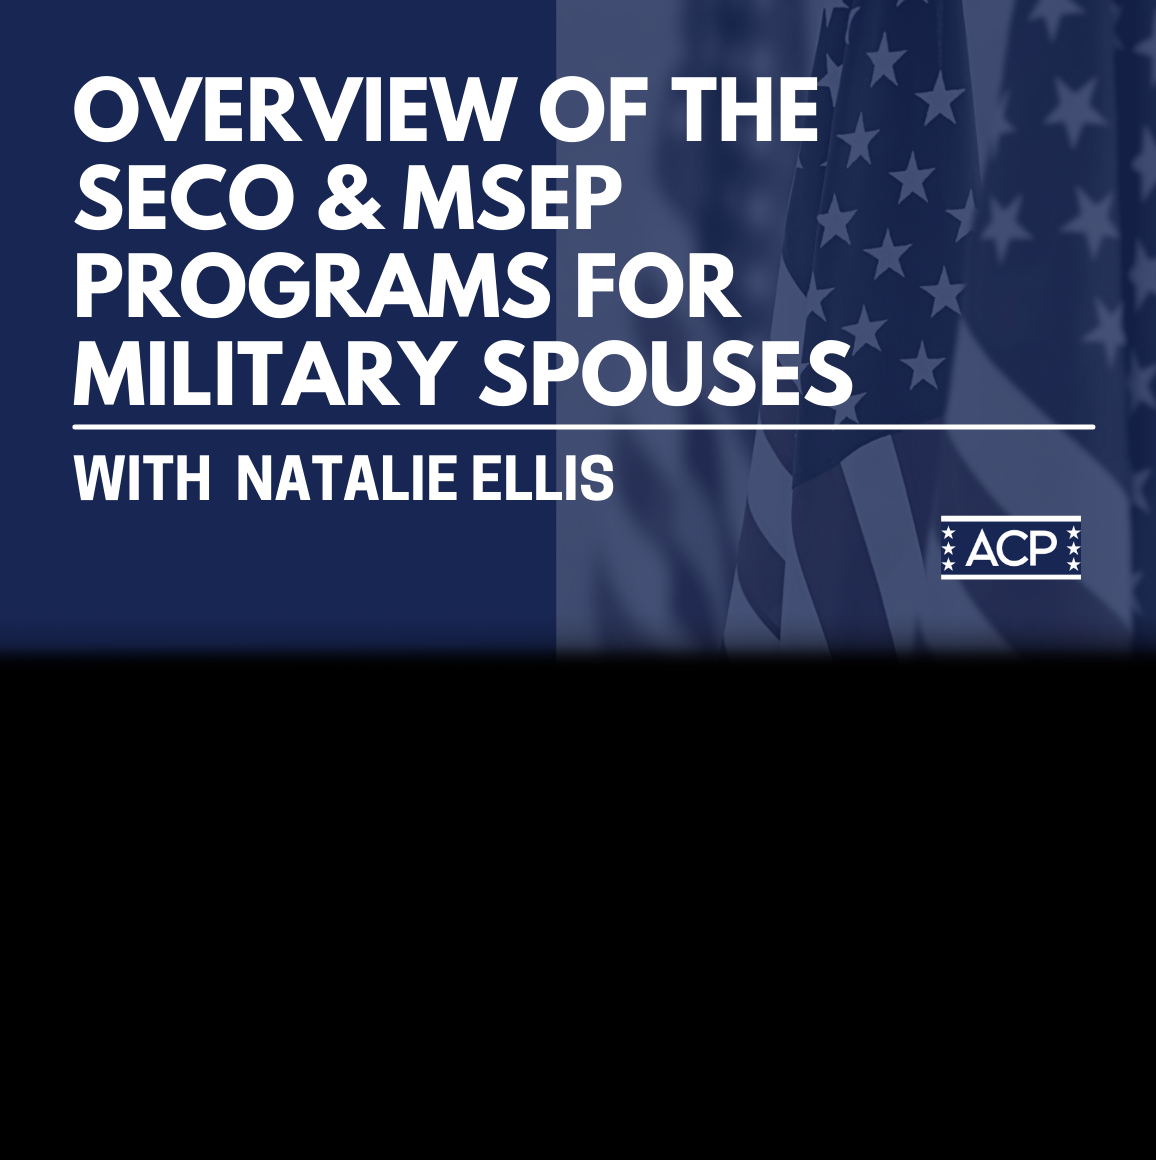 Overview of the SECO & MSEP Programs For Military Spouses